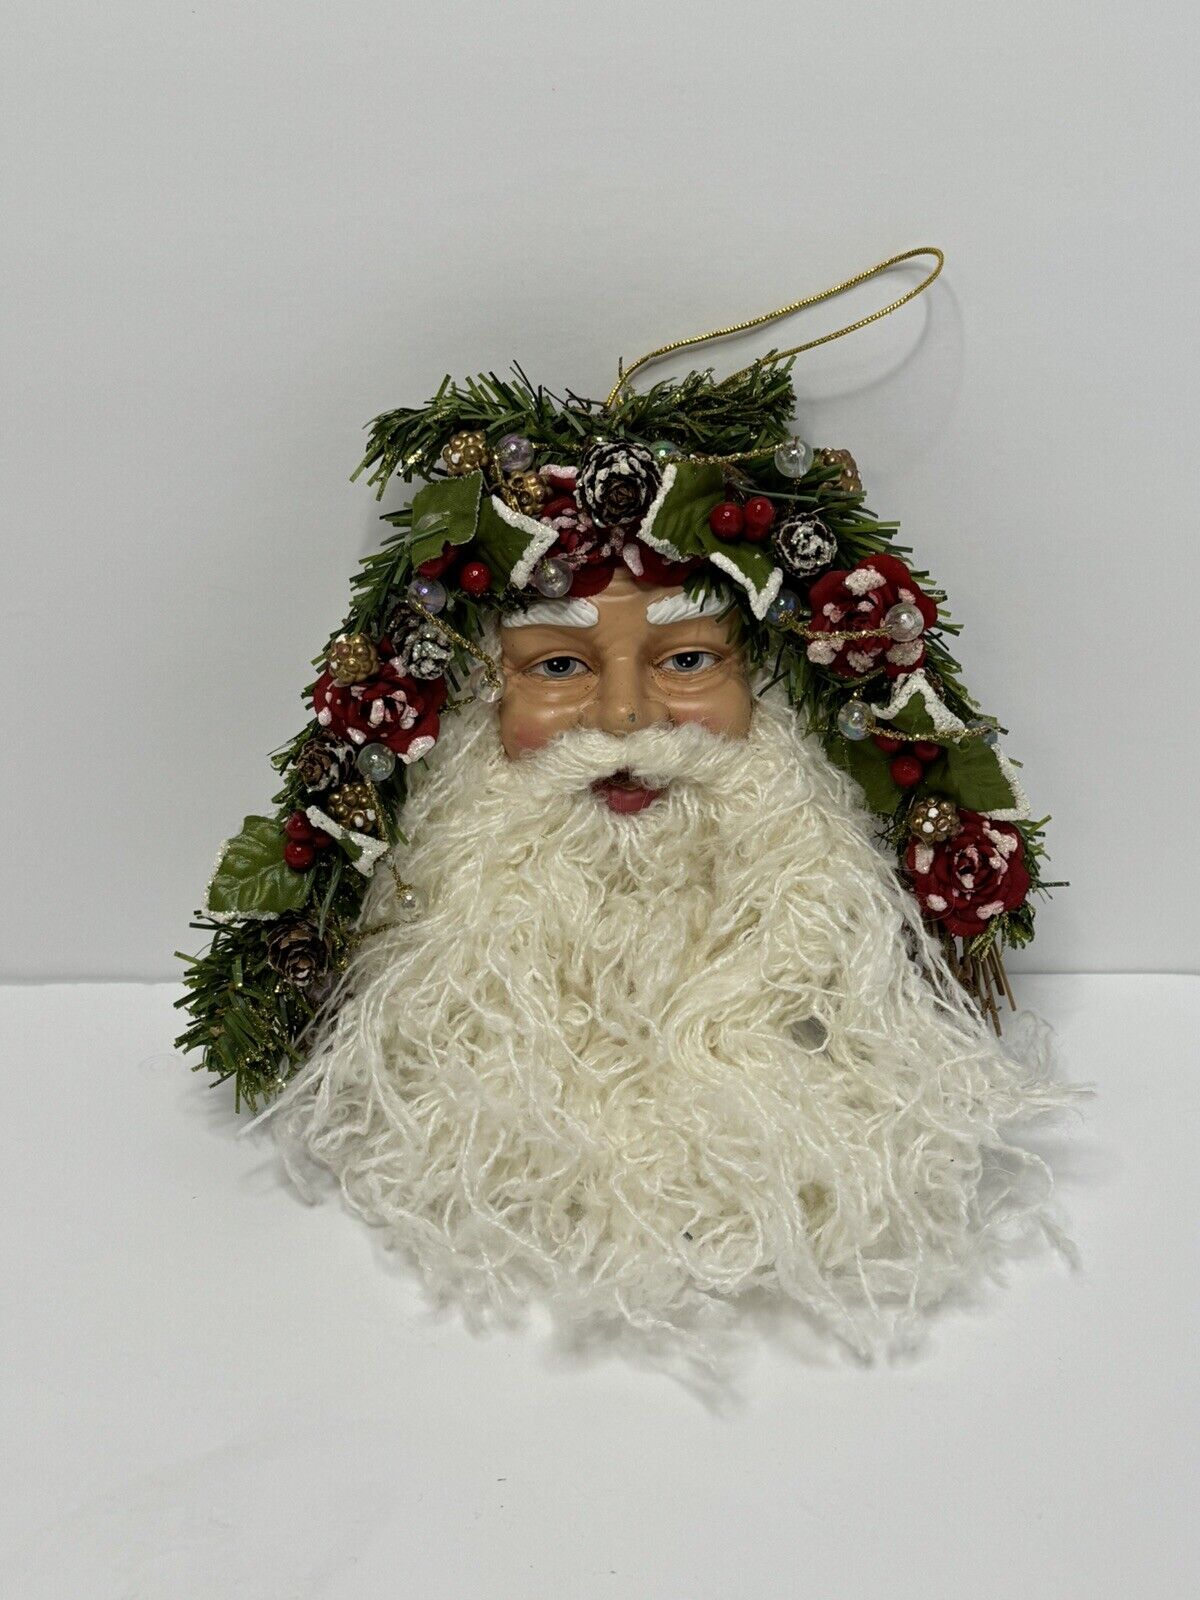 Vintage Father Christmas - Santa Claus Wall Hanging or Lg Ornament